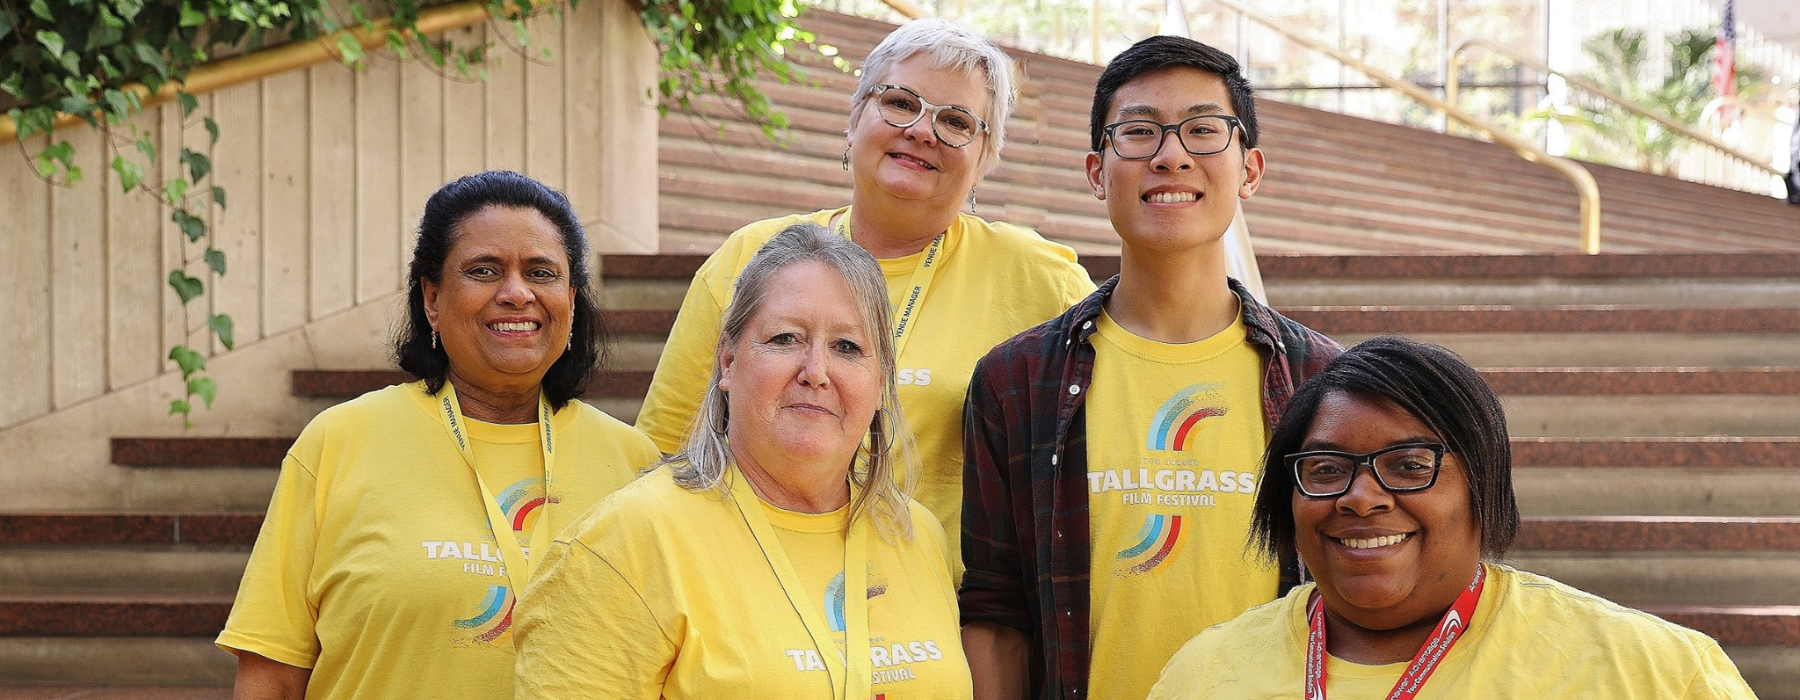 5 volunteers stand in front of a set of stairs wearing bright yellow shirts